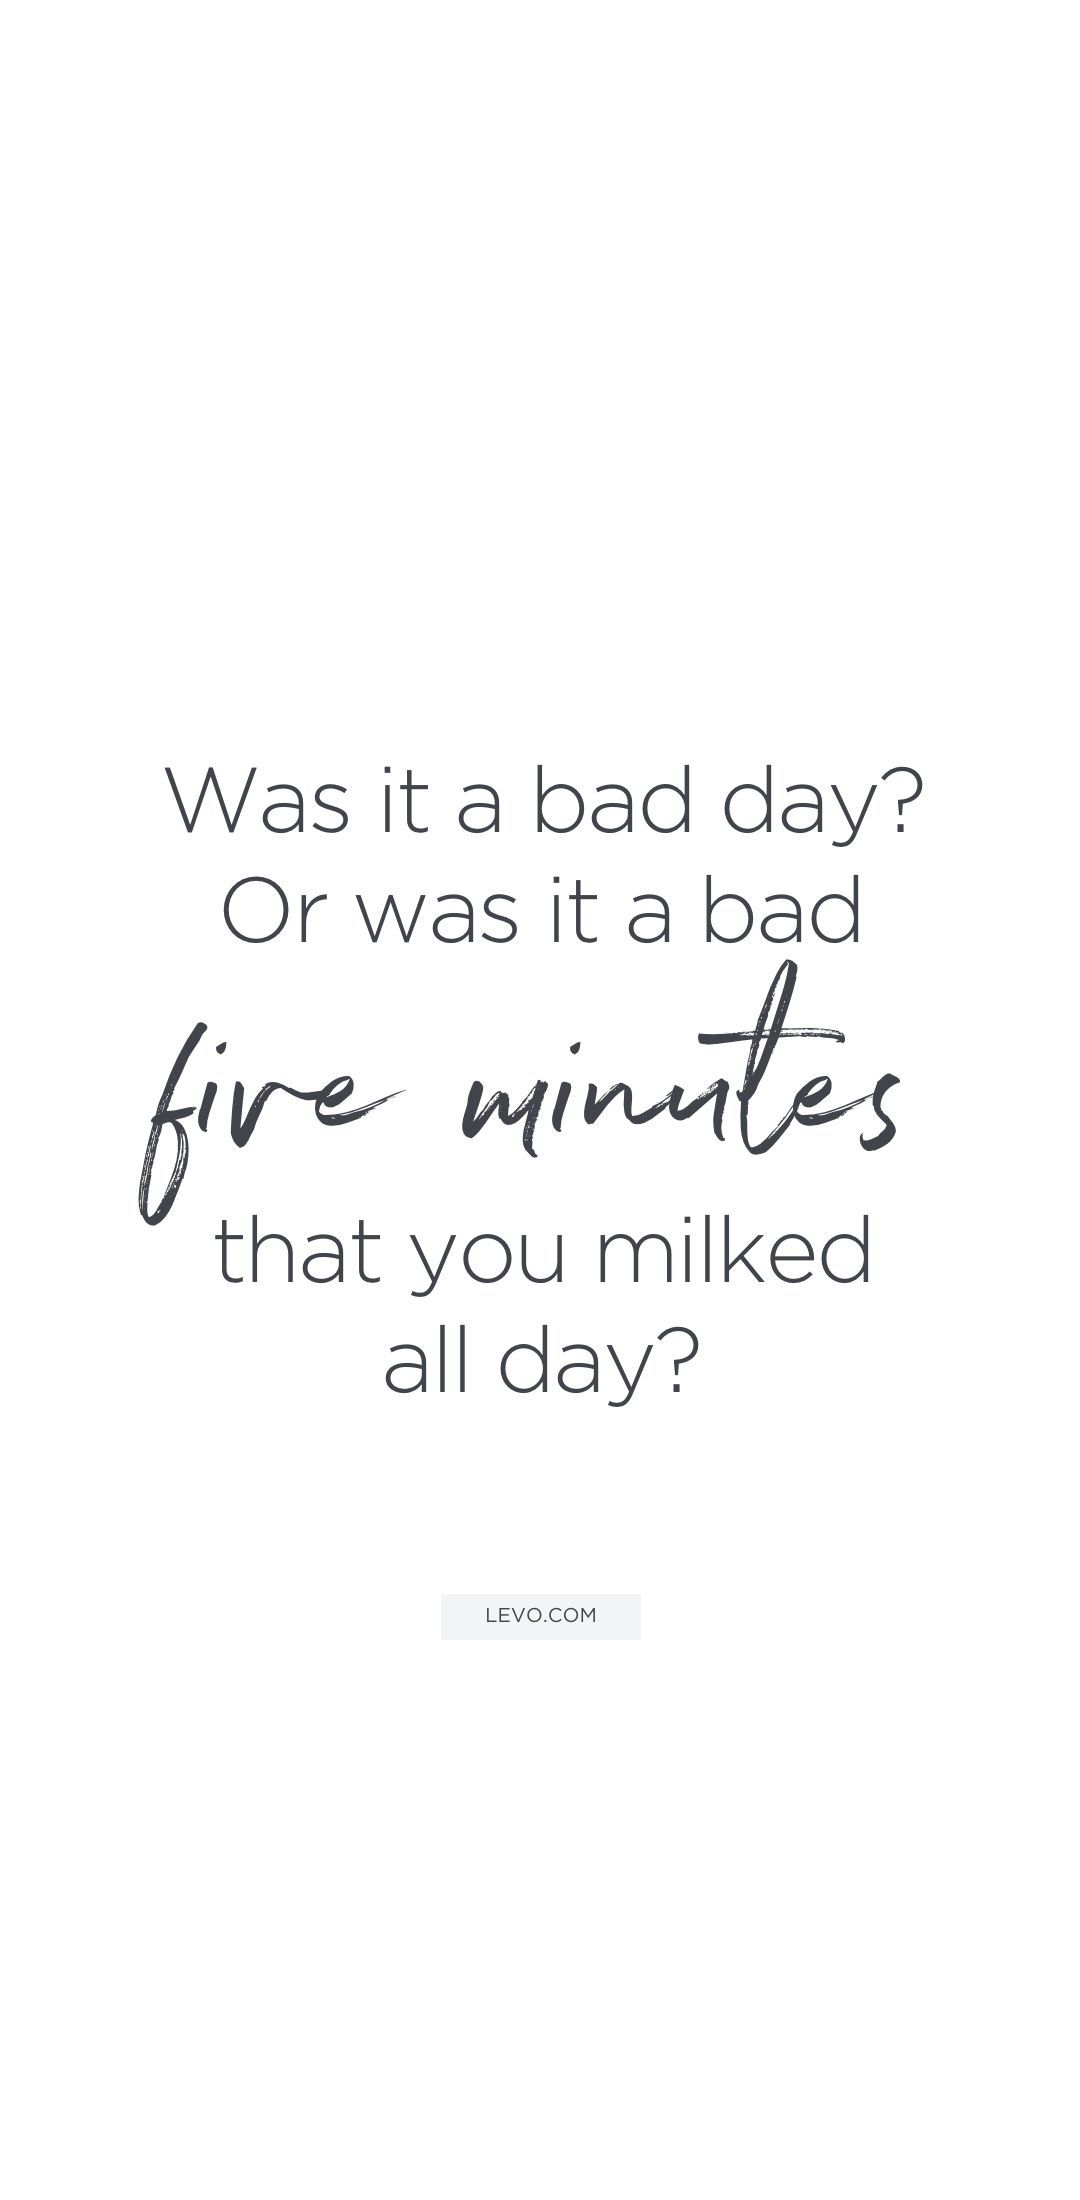 Uplifting quotes to make your bad day so much better: perspective in five minutes